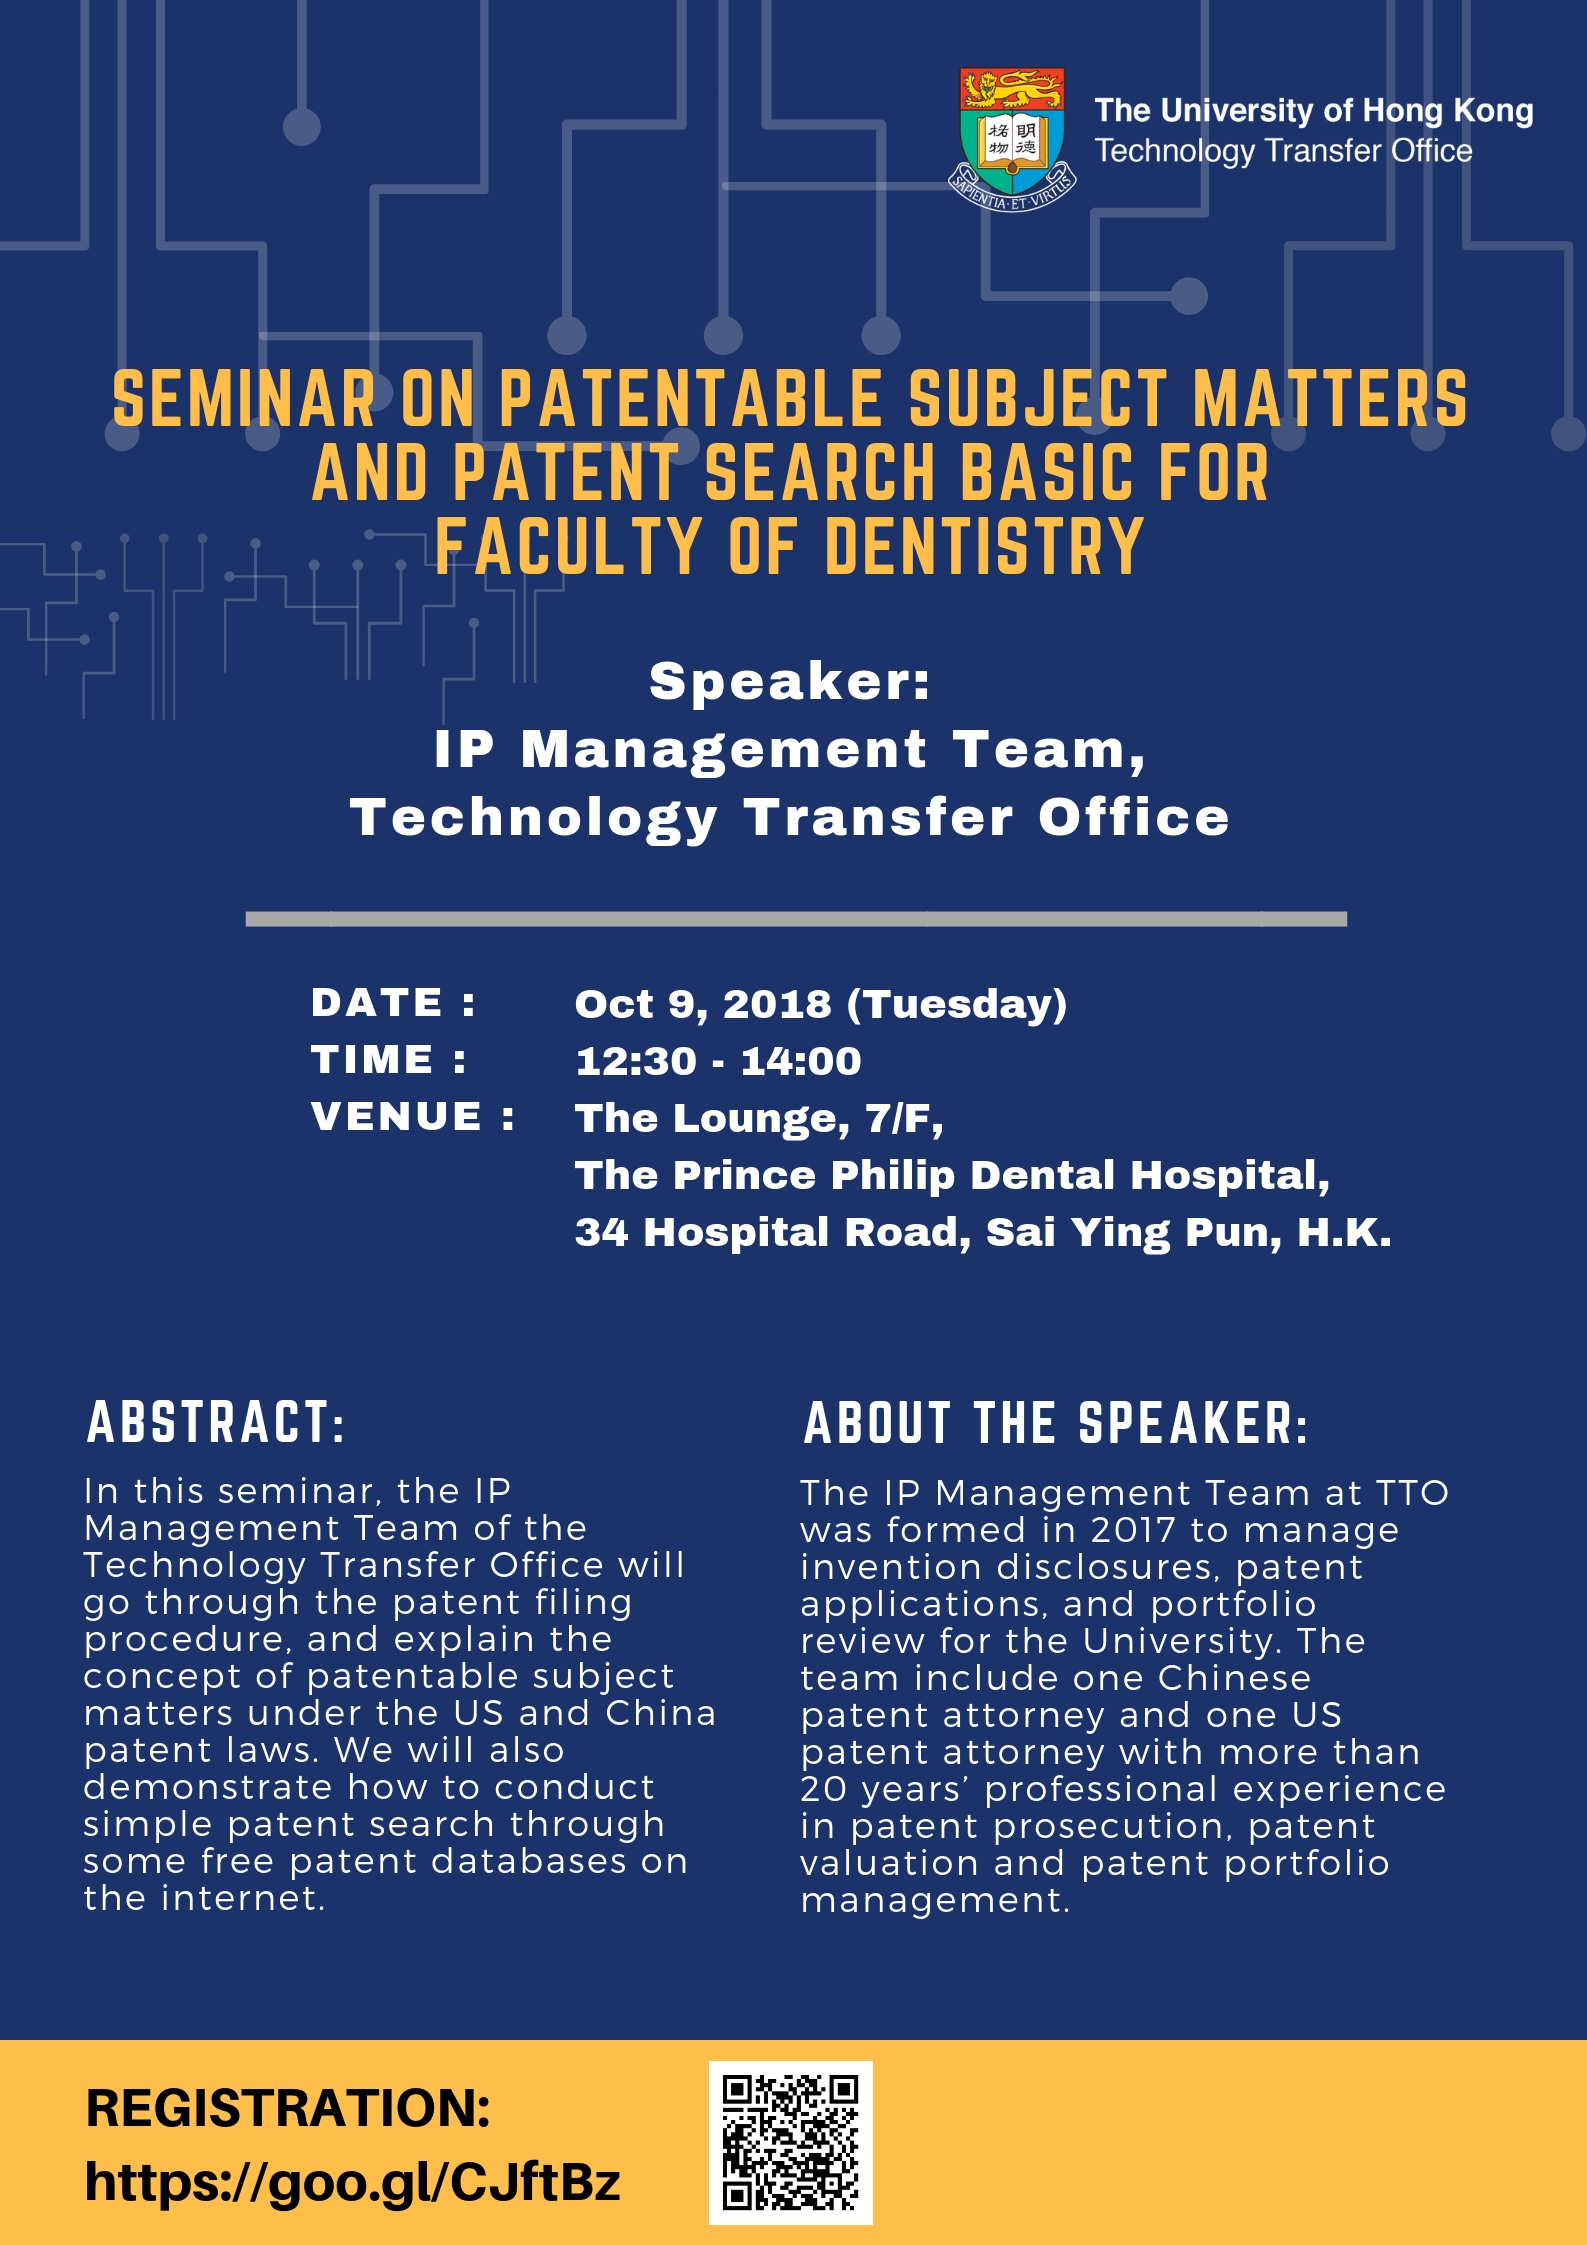 Seminar on Patentable Subject Matters and Patent Search Basic for Faculty of Dentistry